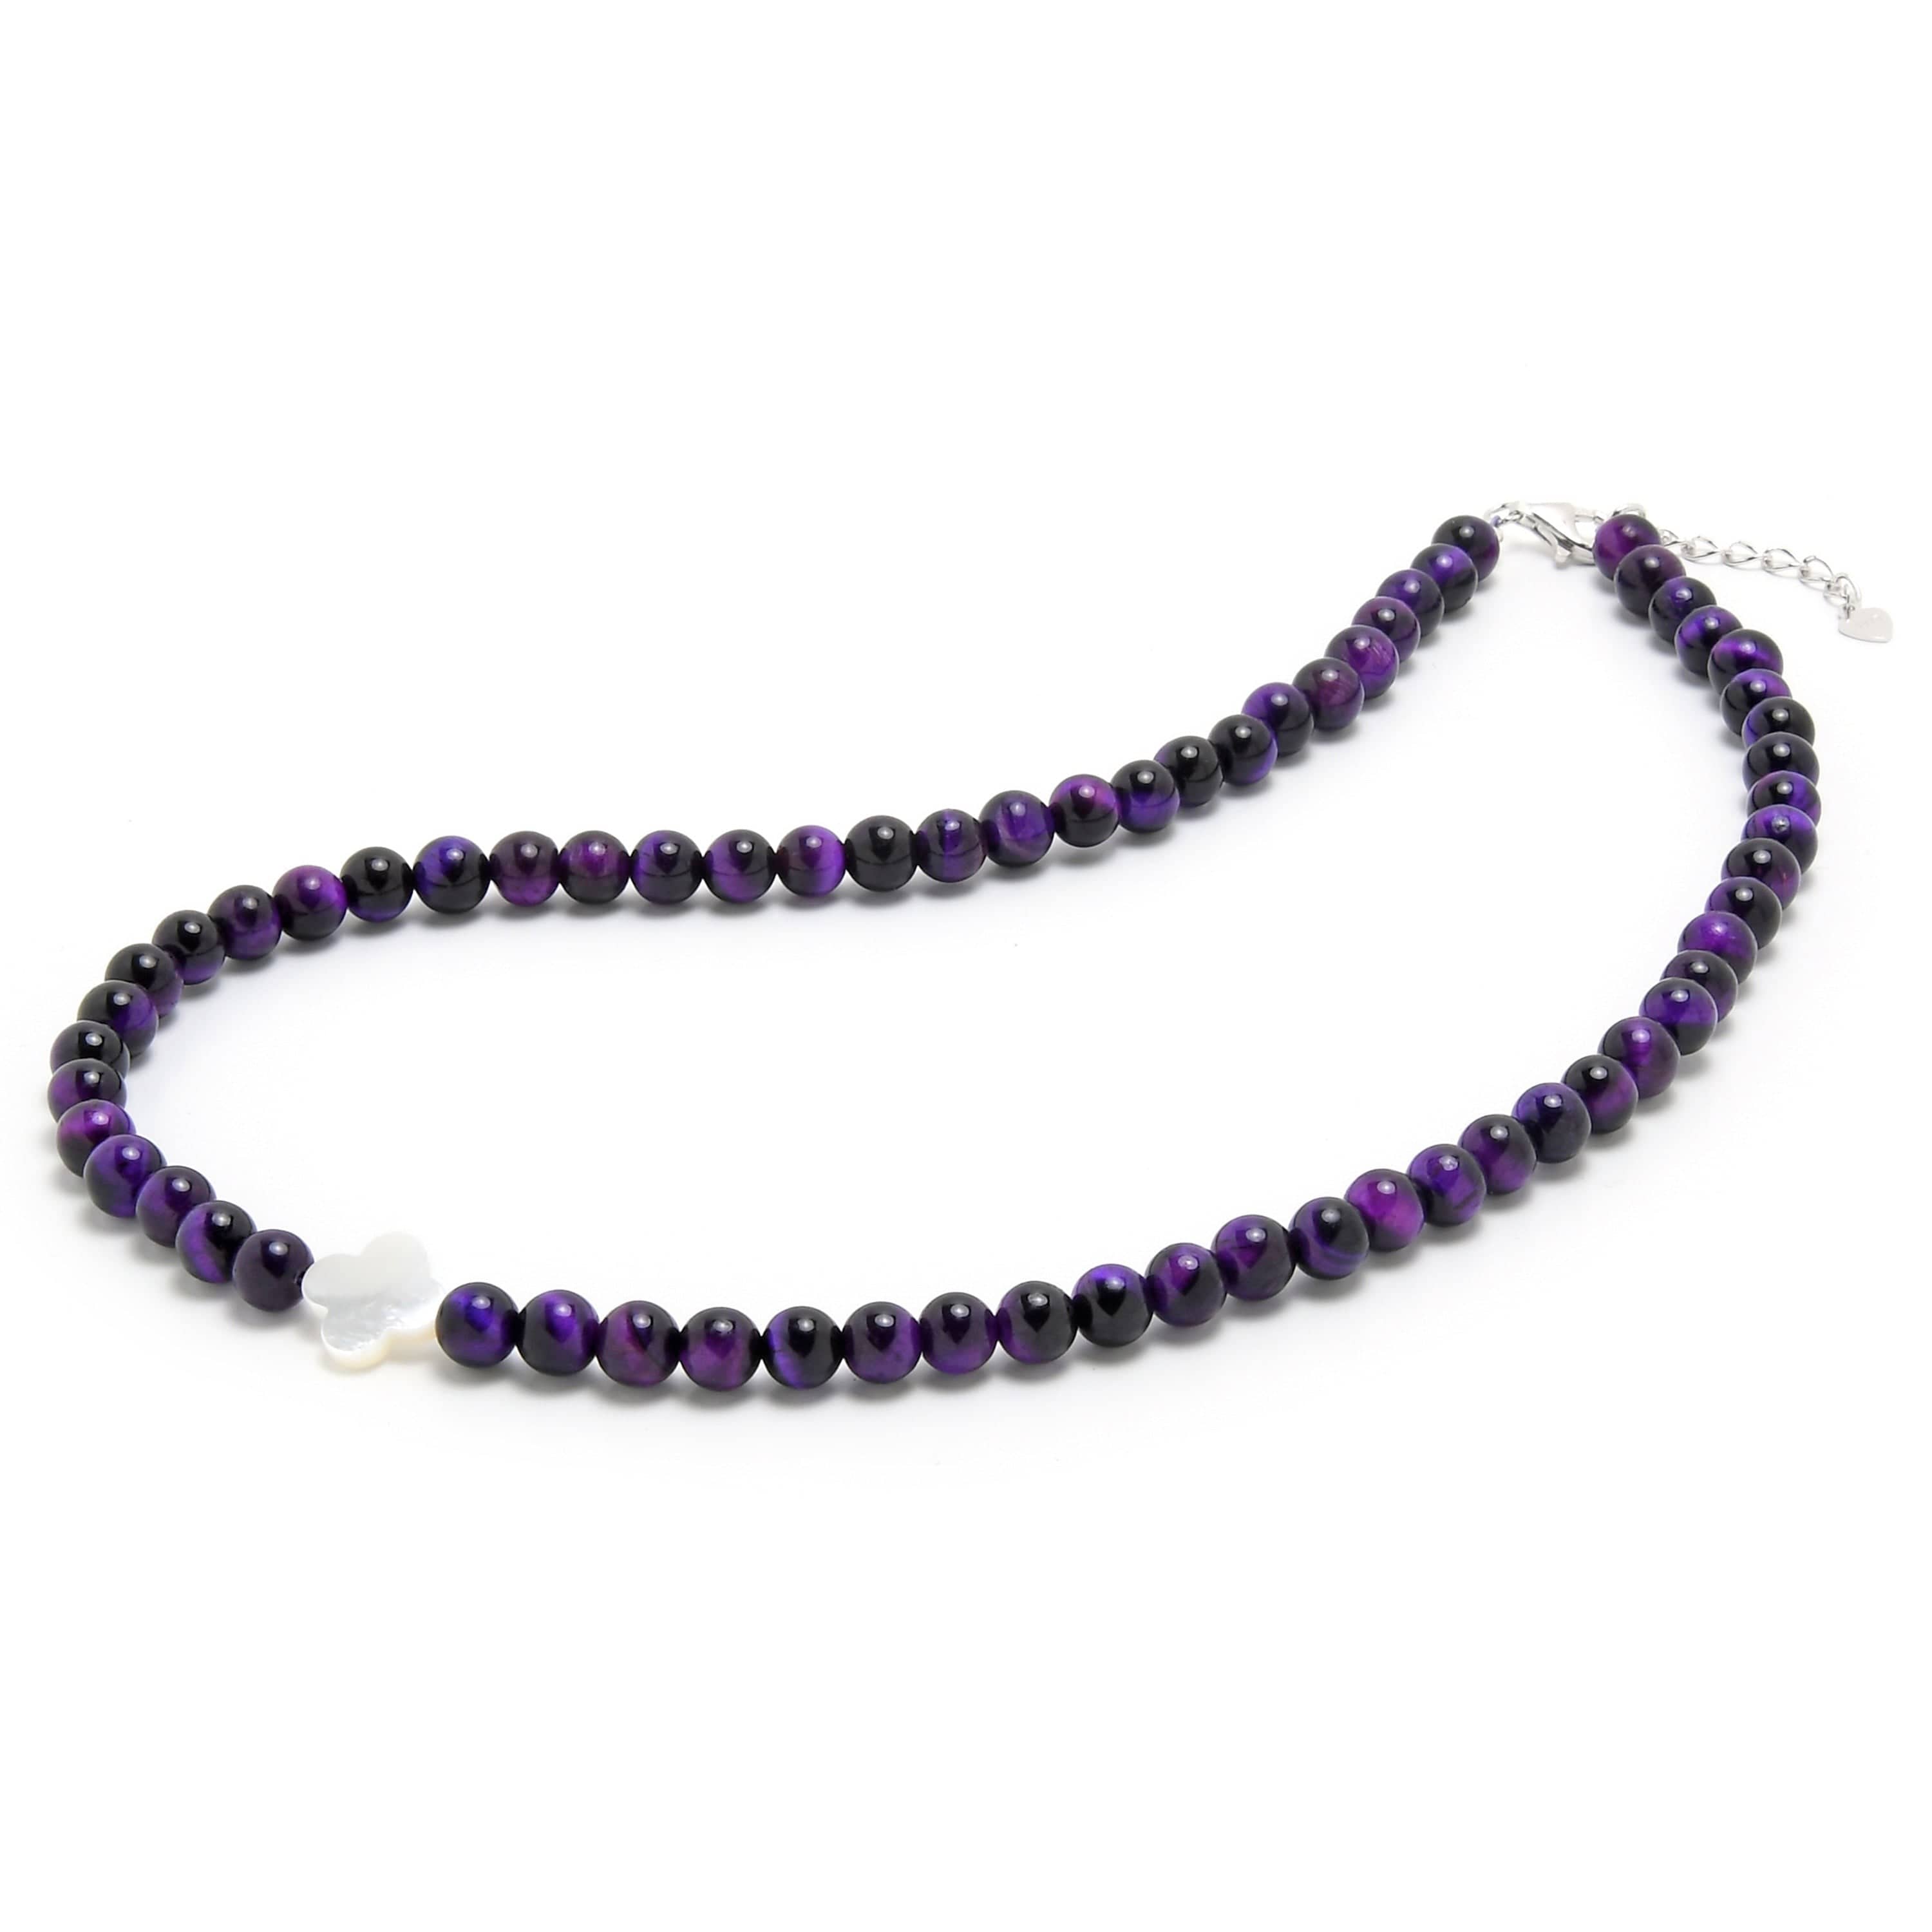 Kalifano Gemstone Bracelets 6mm Purple Tiger Eye Necklace with Mother of Pearl Clover Pendant N6TE-PP-CL-MOP